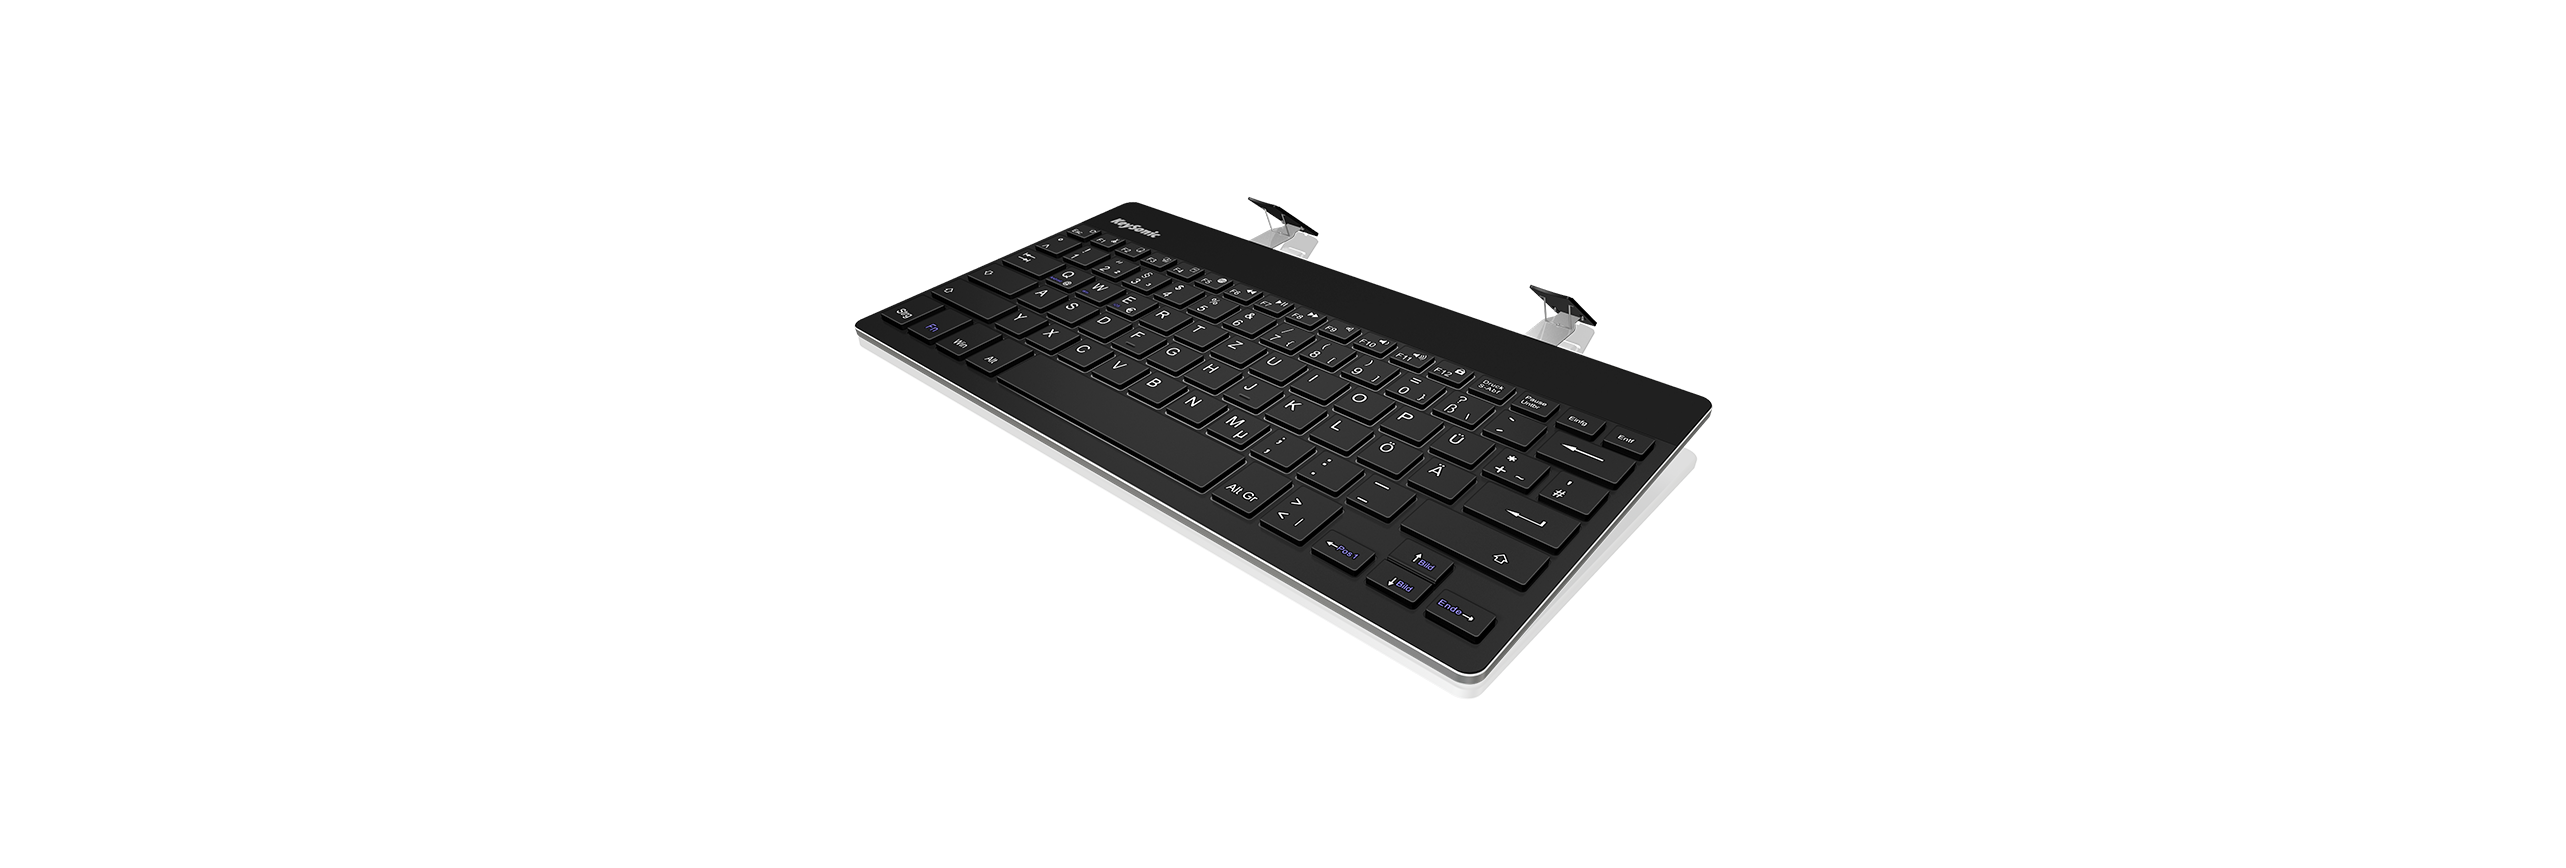 Keyboard in compact size with aluminium housing